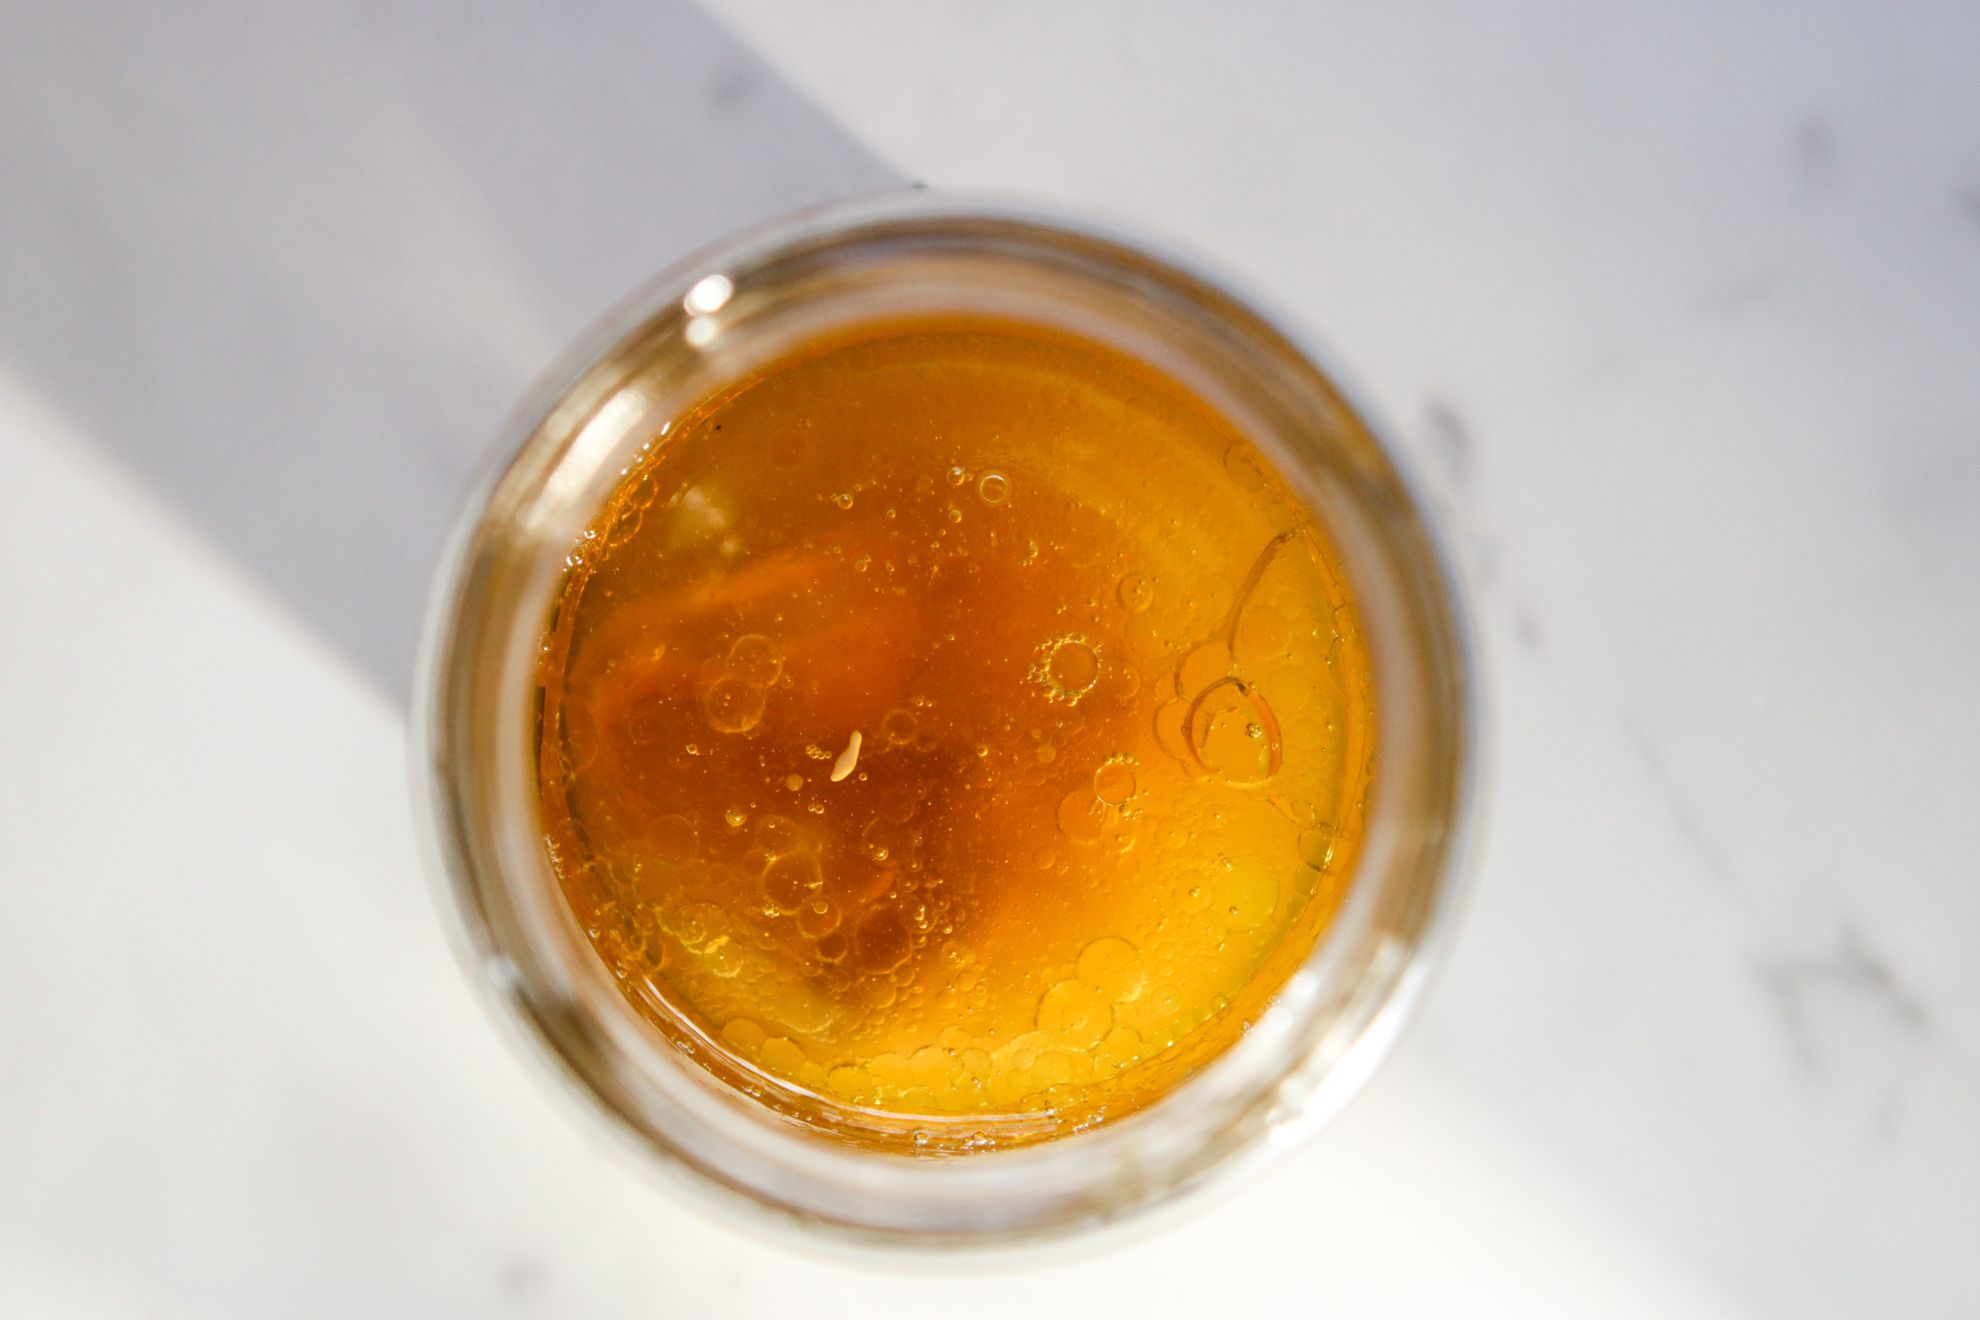 This is an overhead image of a glass jar filled with amber color liquid. The jar sits on a white marble counter.